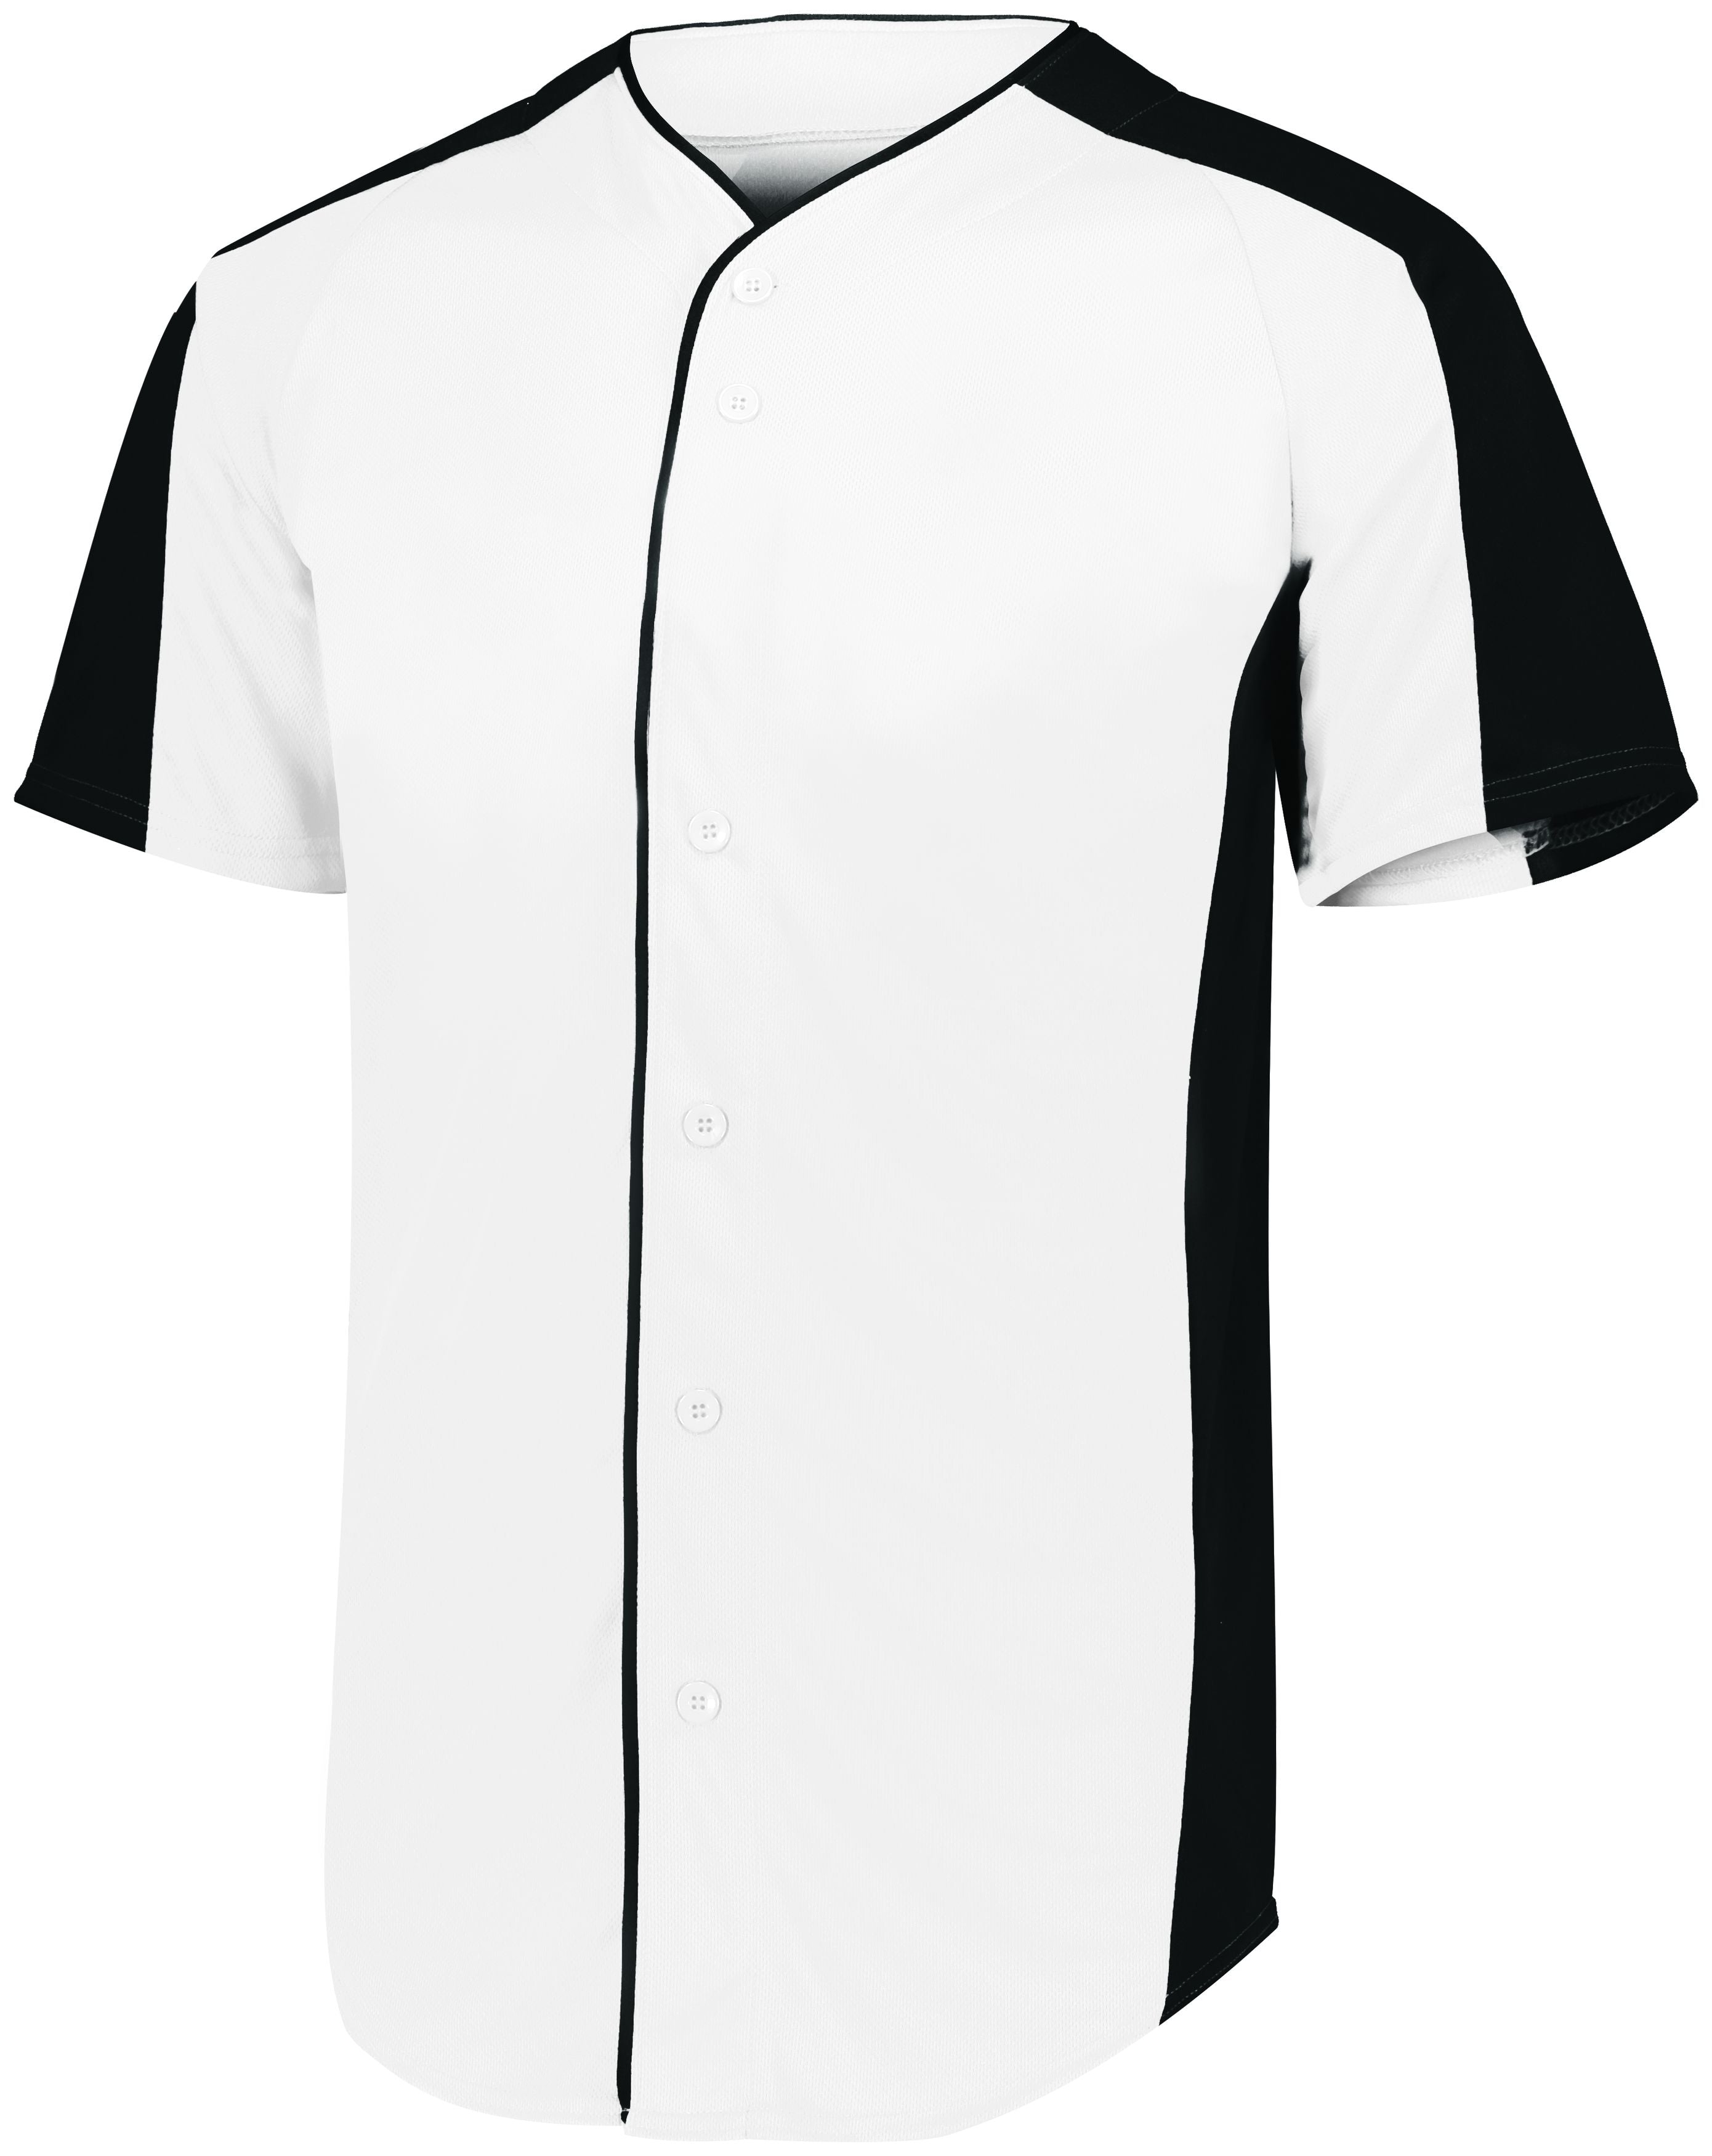 Augusta Sportswear Full-Button Baseball Jersey in White/Black  -Part of the Adult, Adult-Jersey, Augusta-Products, Baseball, Shirts, All-Sports, All-Sports-1 product lines at KanaleyCreations.com